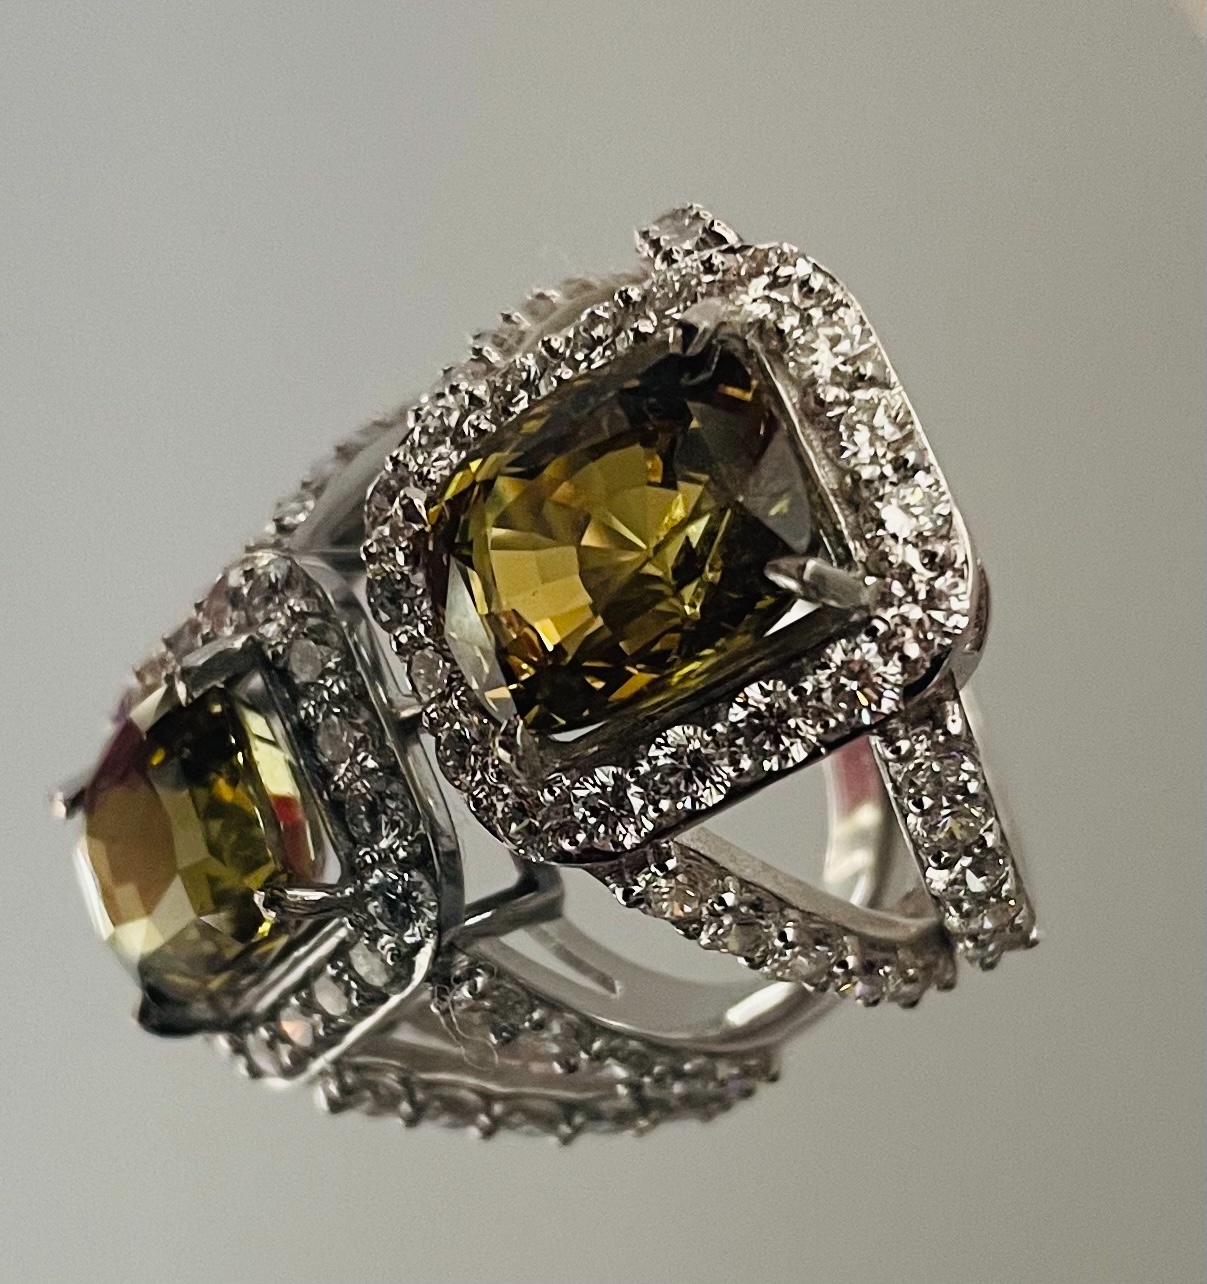 4.17Ct Natural Alexandrite Ring Unheated/Untreated with Diamonds & 18k Gold - Image 3 of 9